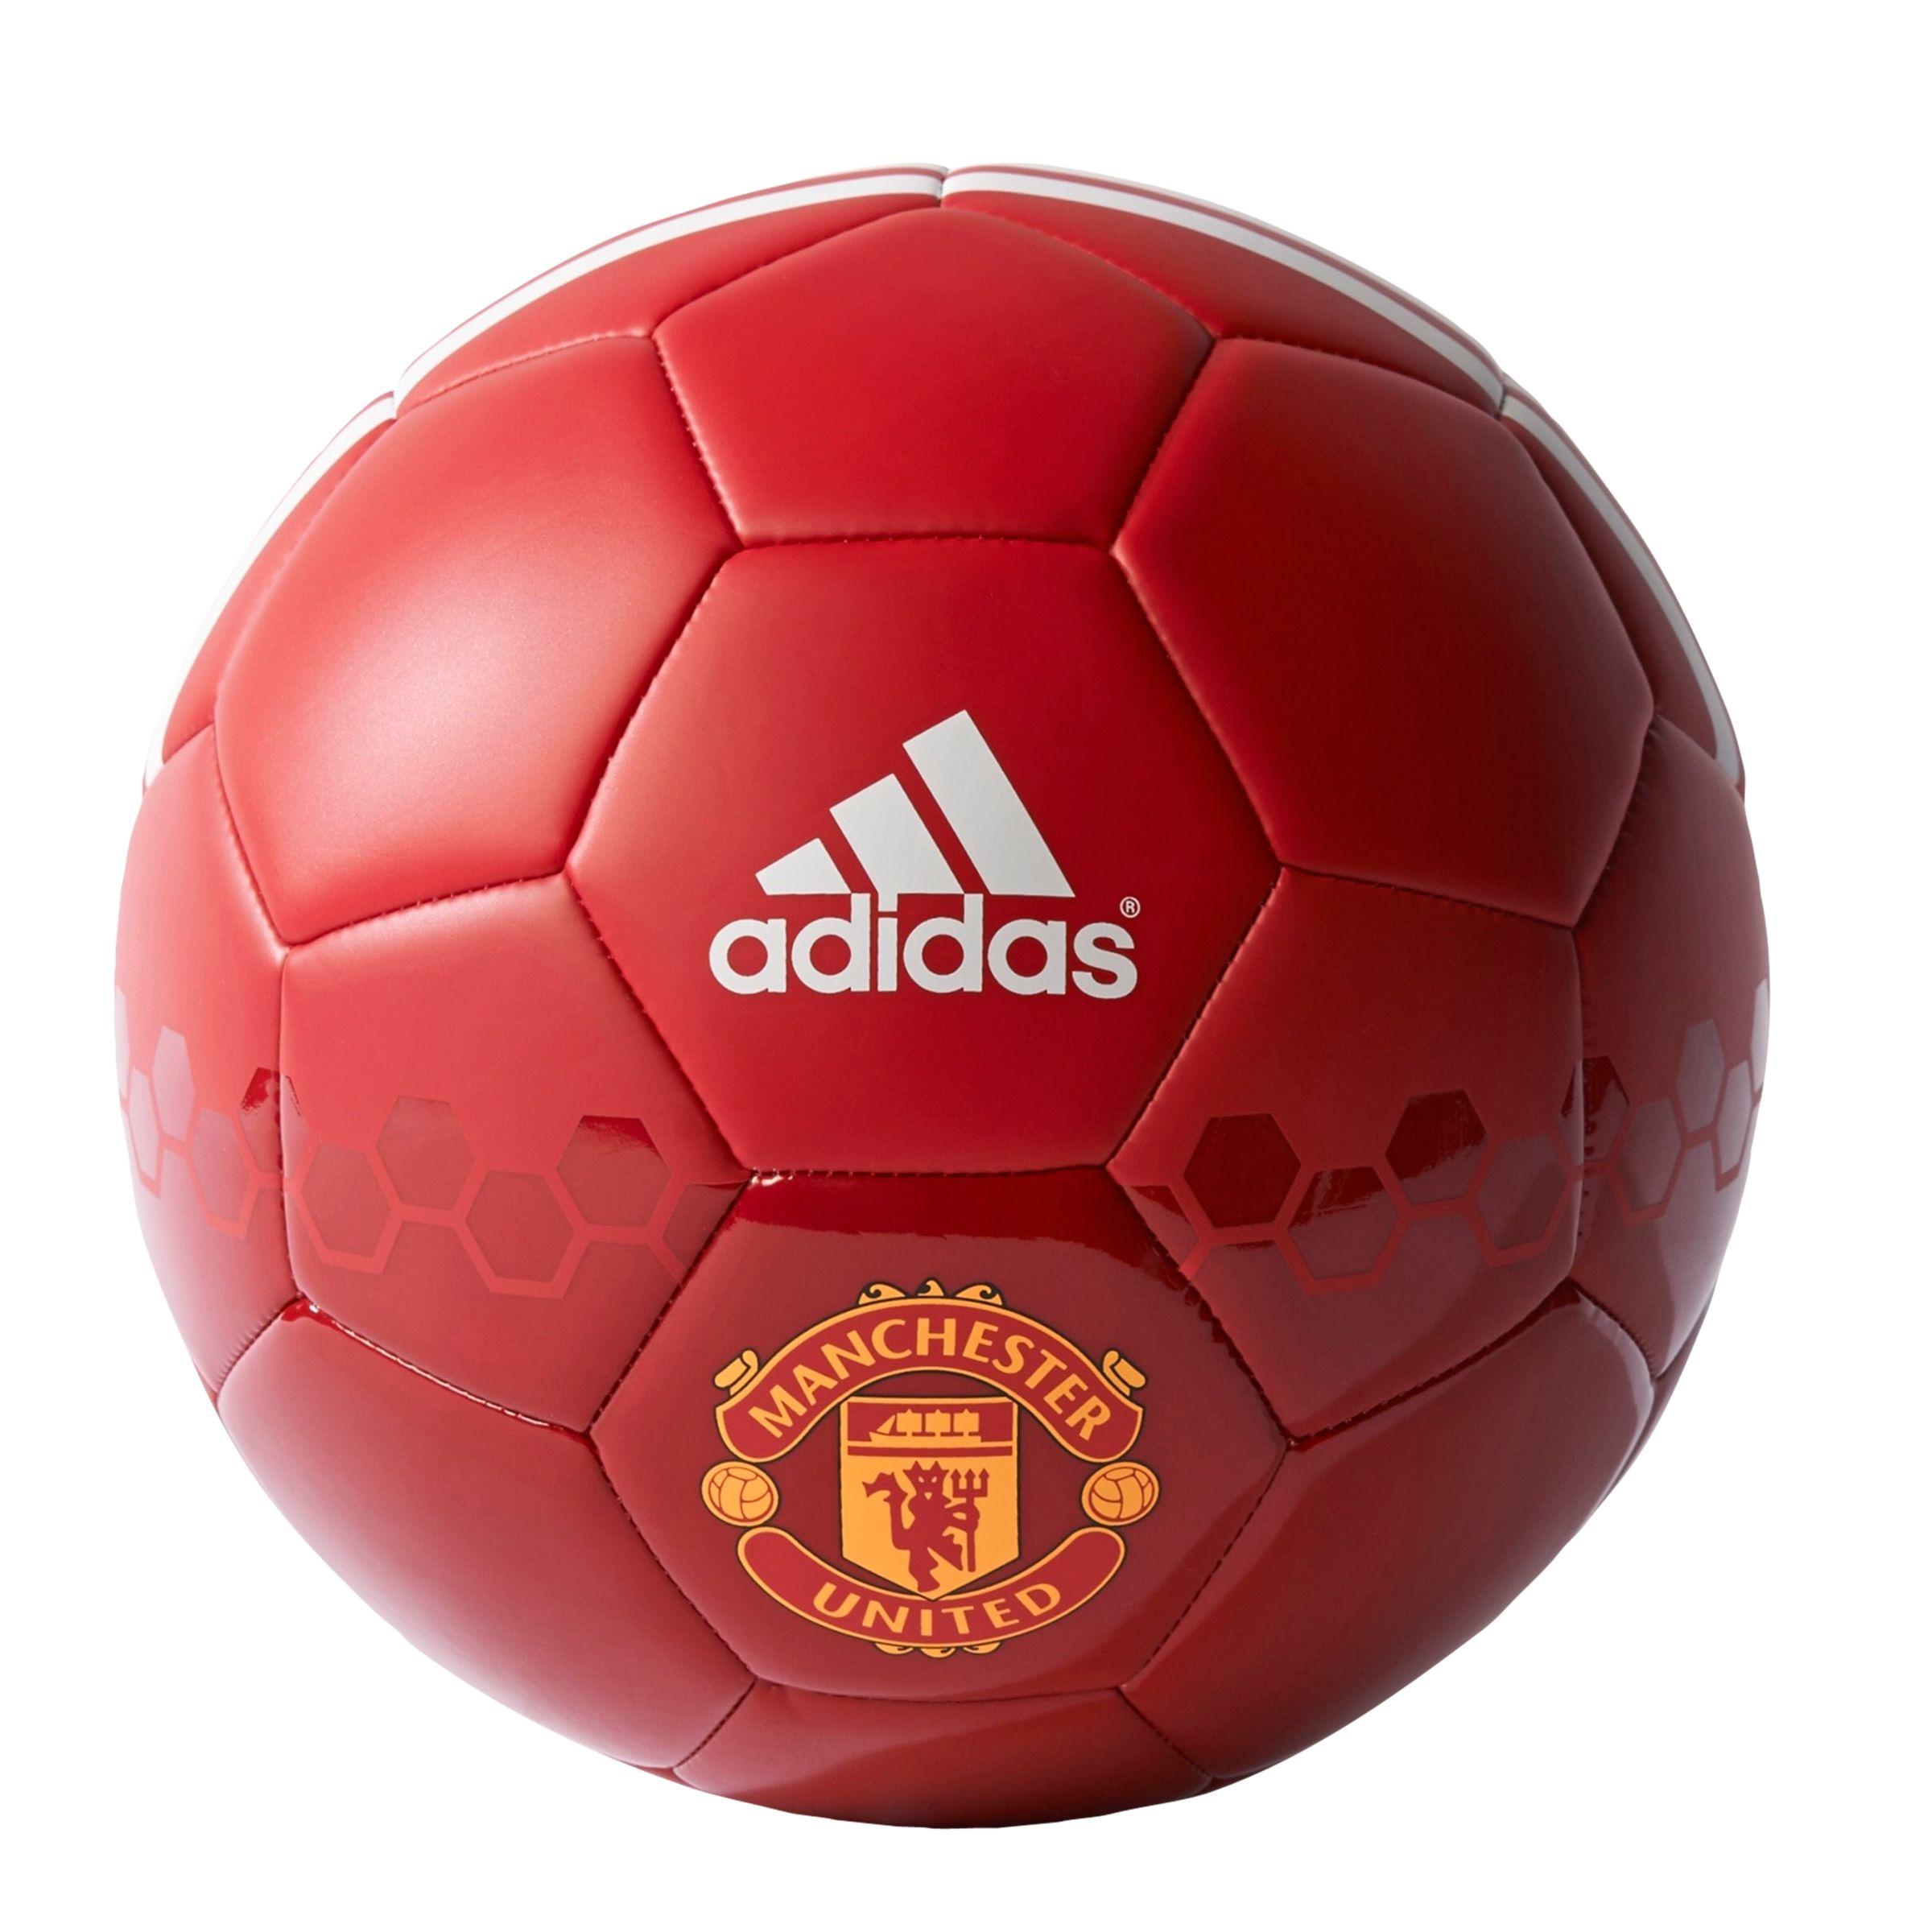 Adidas Manchester United F.C. Football, Size 5, Red